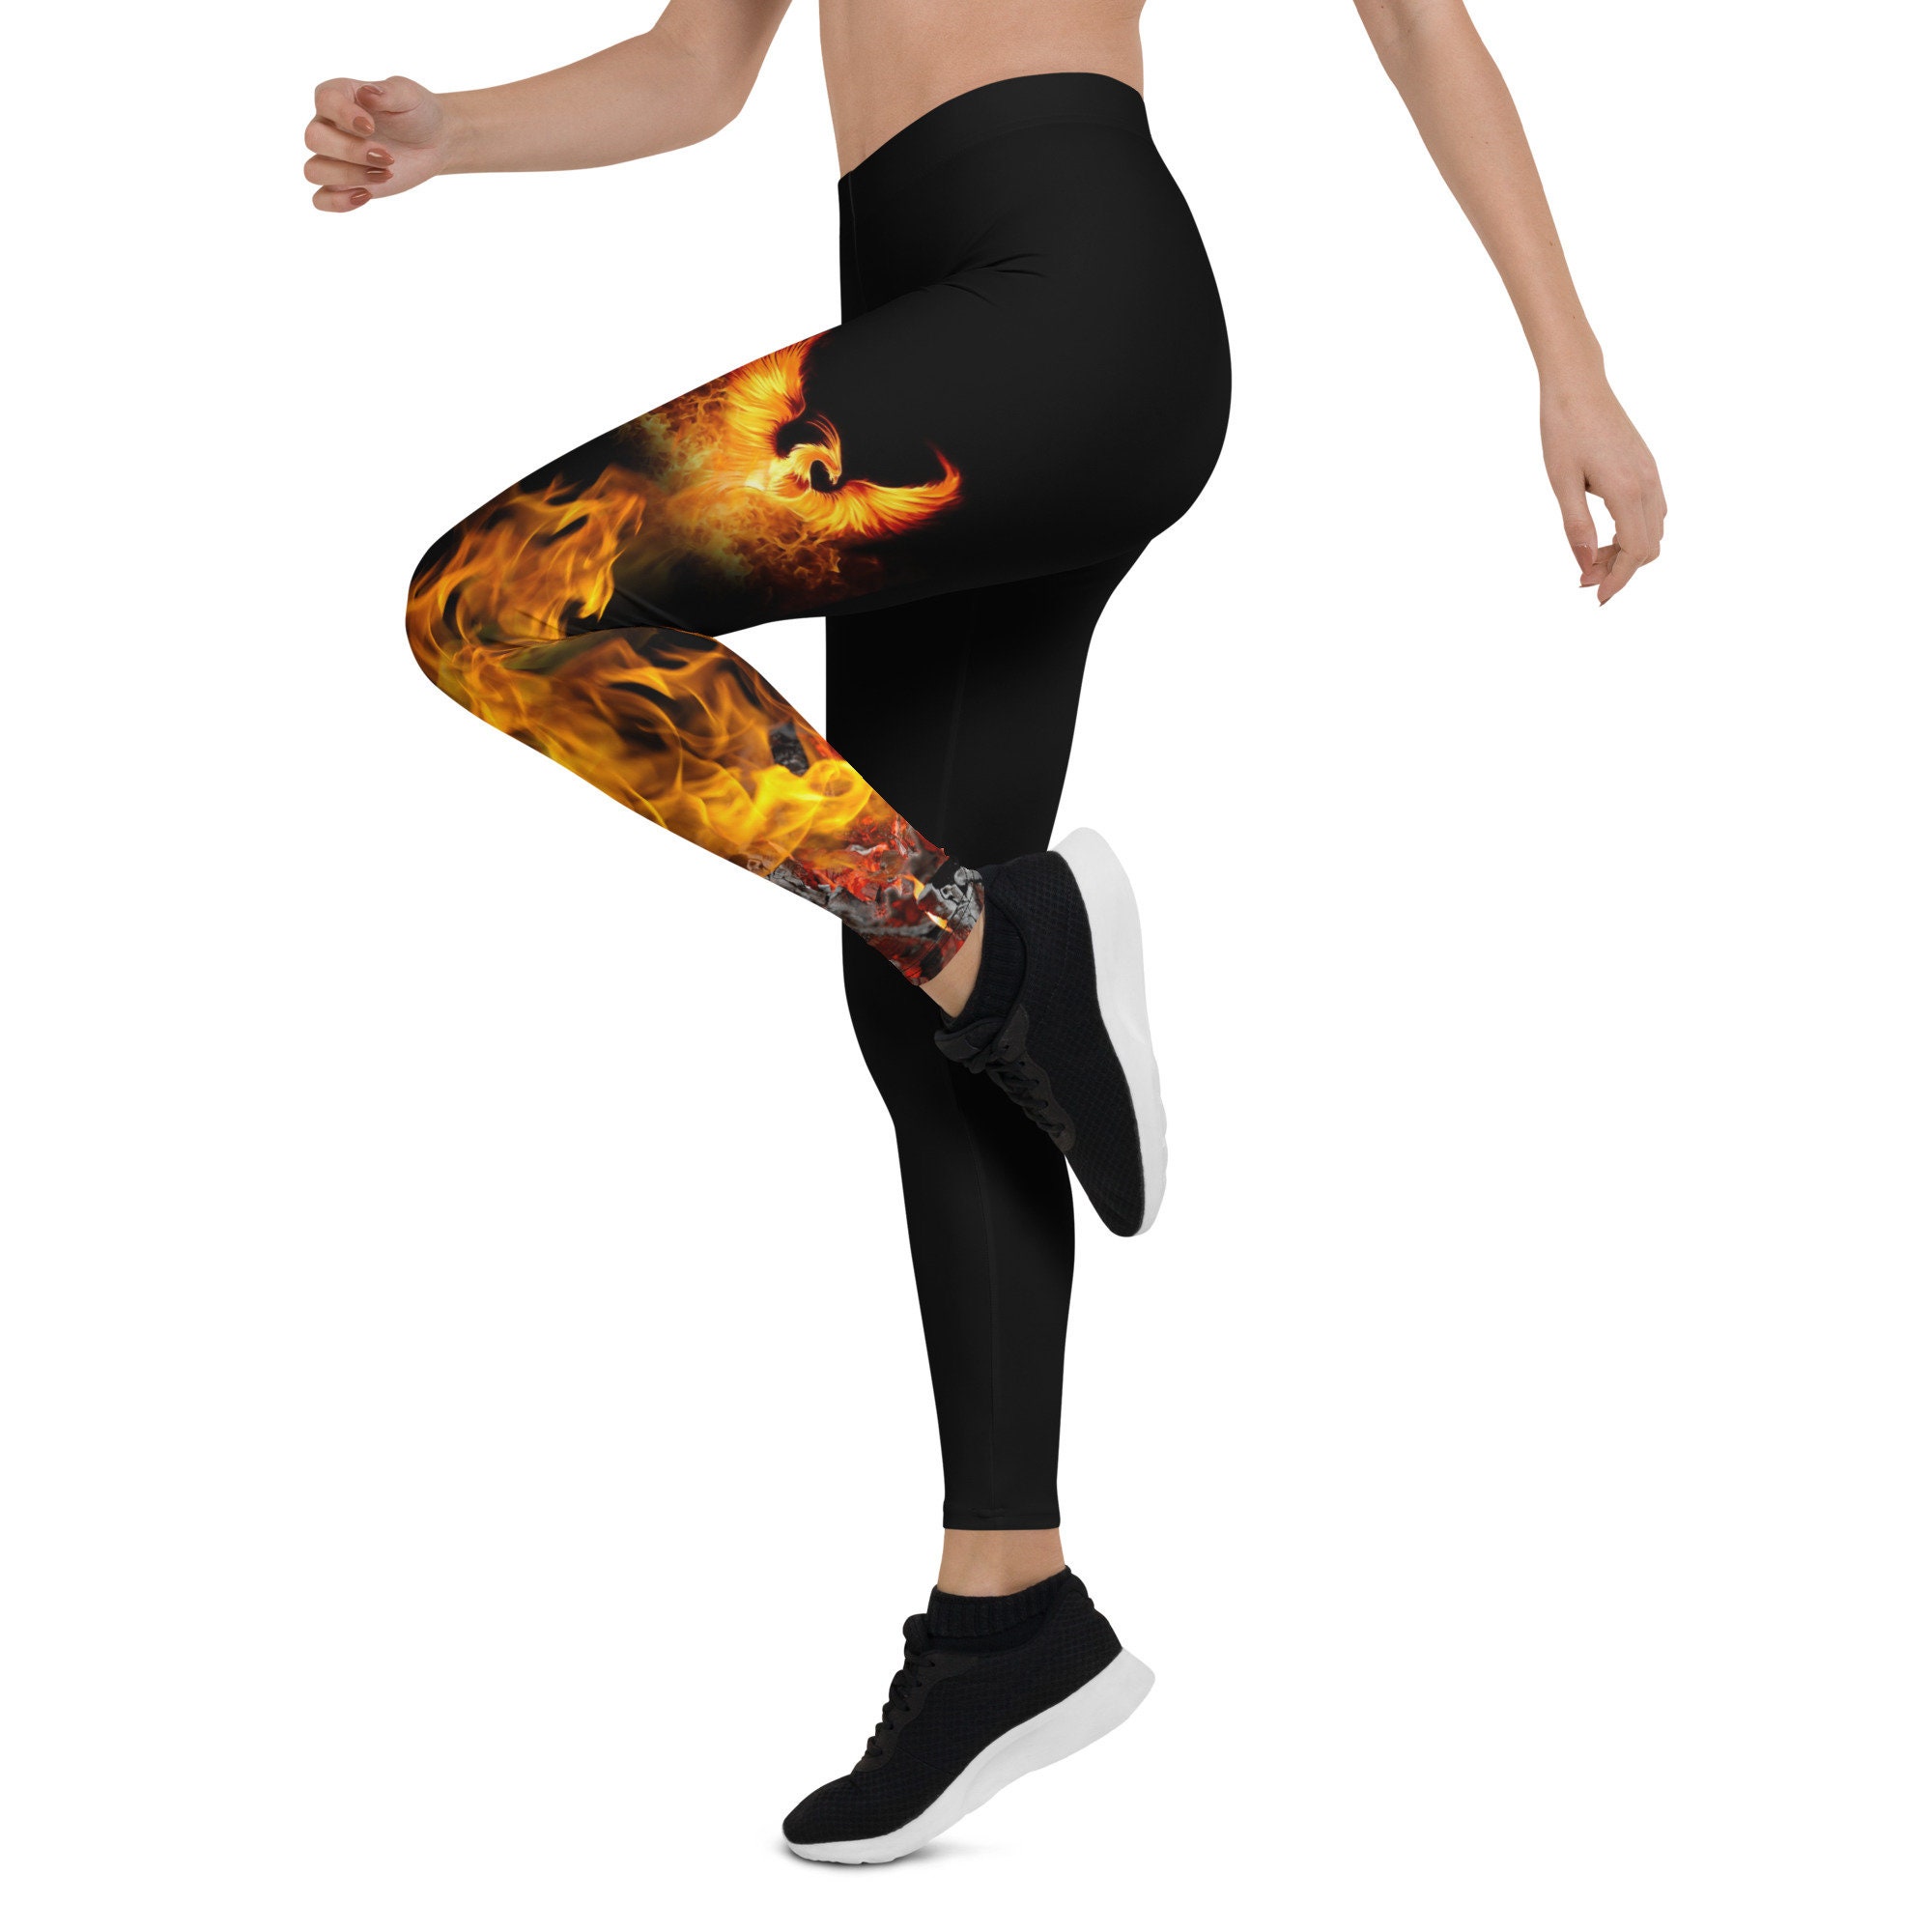 We Flame to Please Plus Size Leggings Fire Camping Flame Leggings Camp Fire  Hiking Swim Leggings 